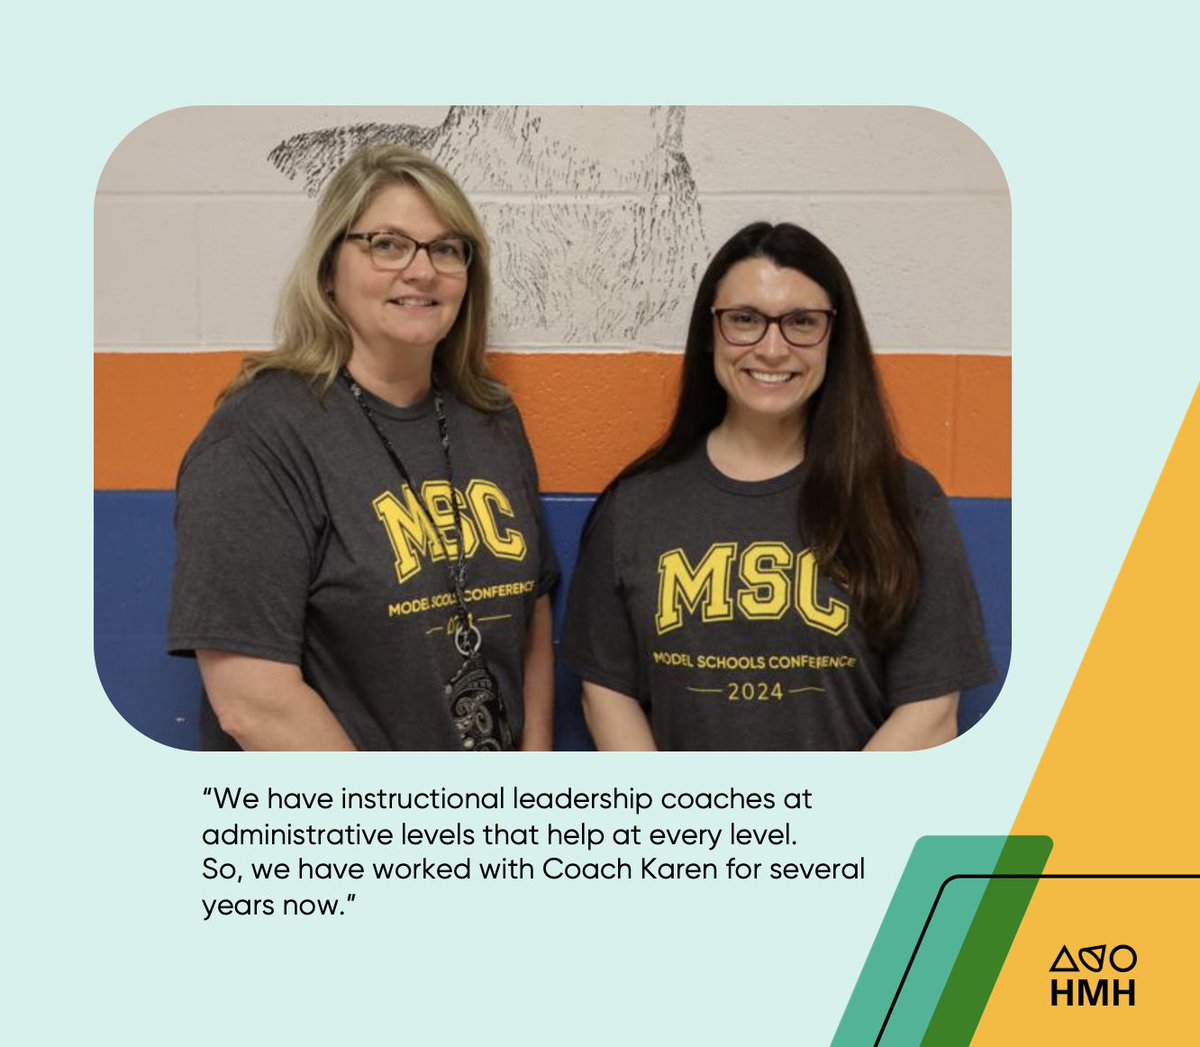 Their journey to becoming a Model School began with Instruction and Leadership Coach @KarenCagle11 Read more here: wvnews.com/prestoncountyj…